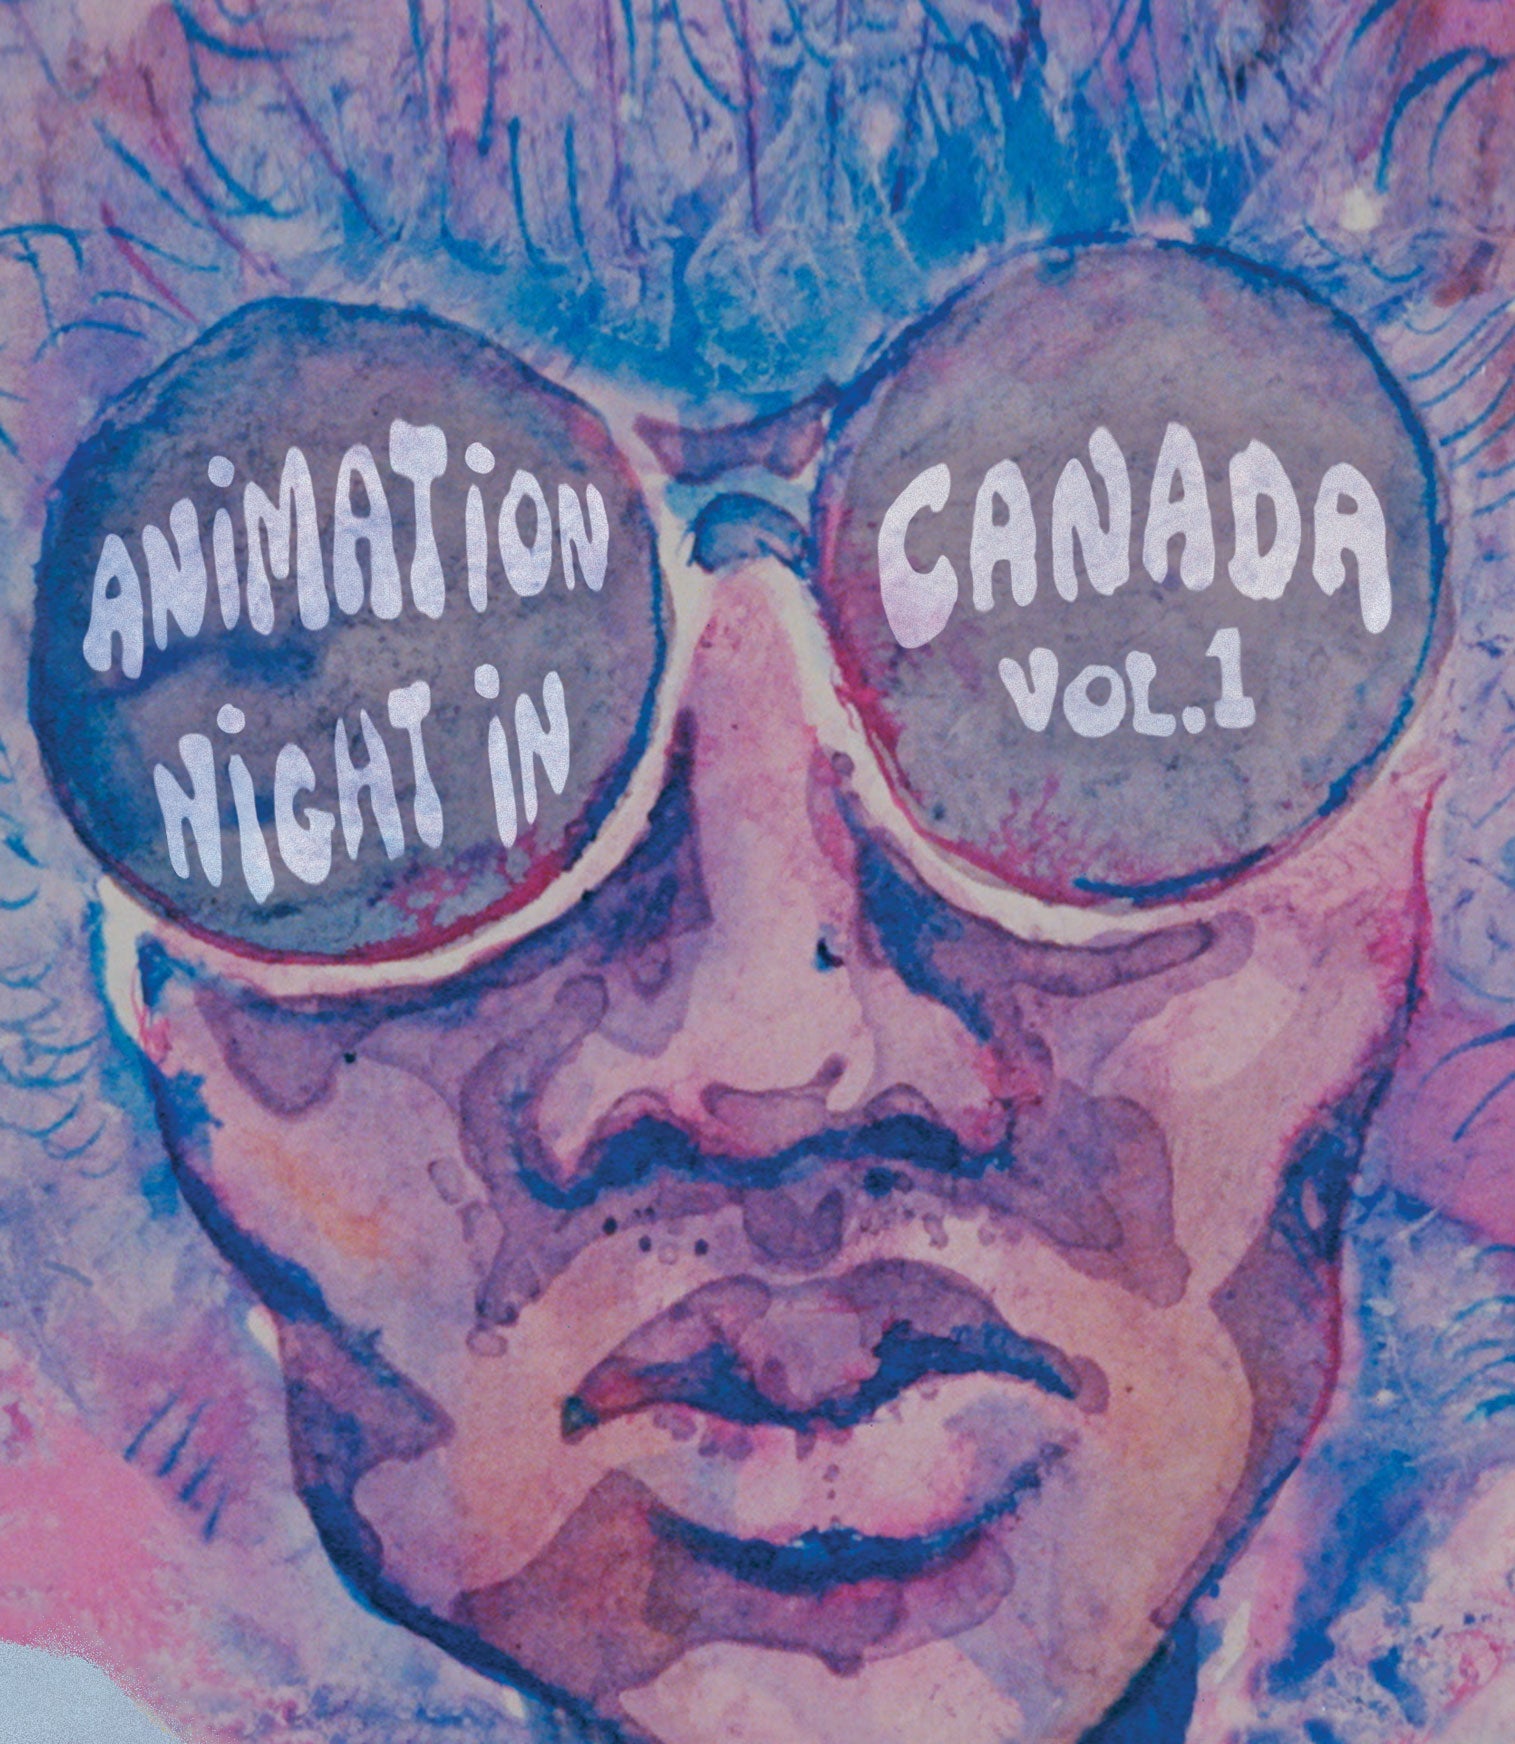 ANIMATION NIGHT IN CANADA VOLUME 1 (LIMITED EDITION) BLU-RAY